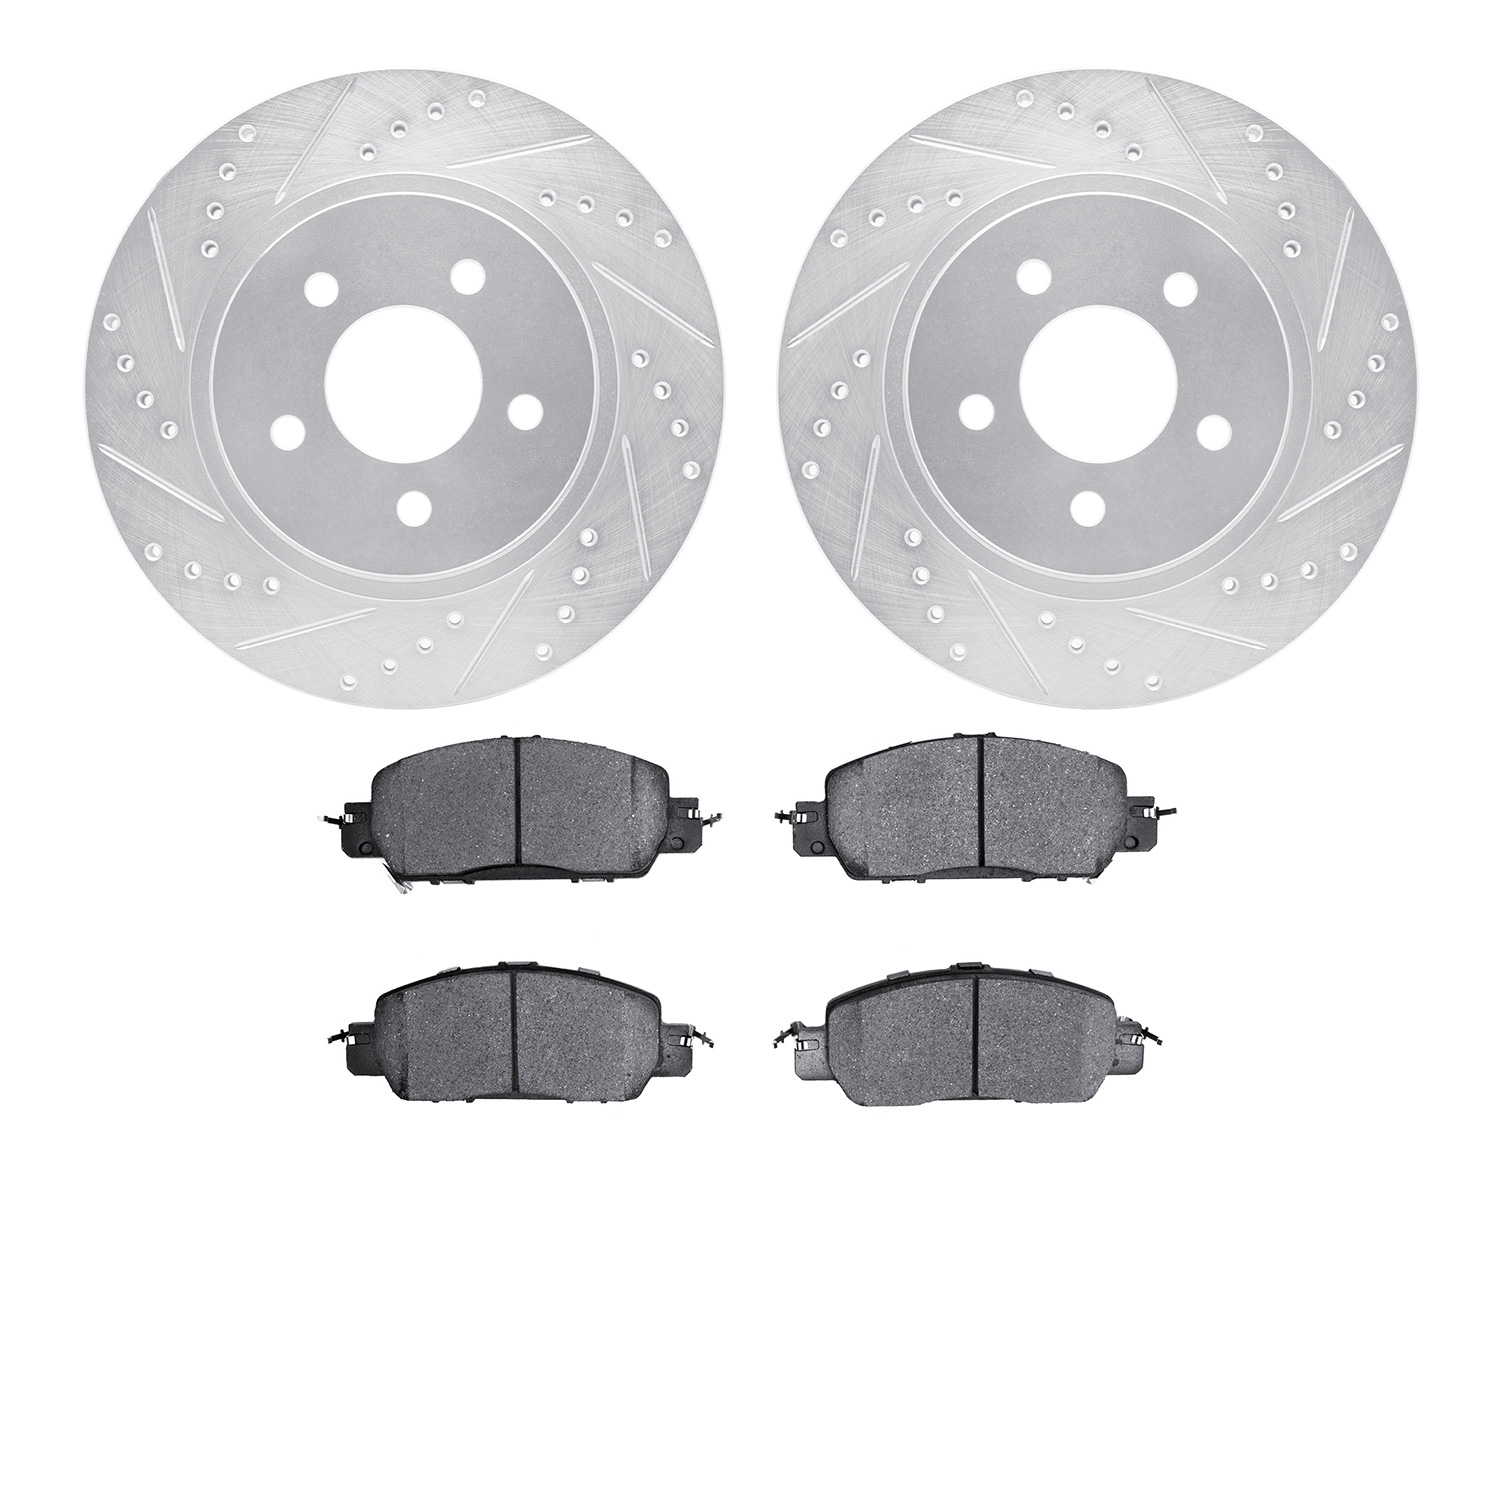 7302-54201 Drilled/Slotted Brake Rotor with 3000-Series Ceramic Brake Pads Kit [Silver], 2005-2014 Ford/Lincoln/Mercury/Mazda, P